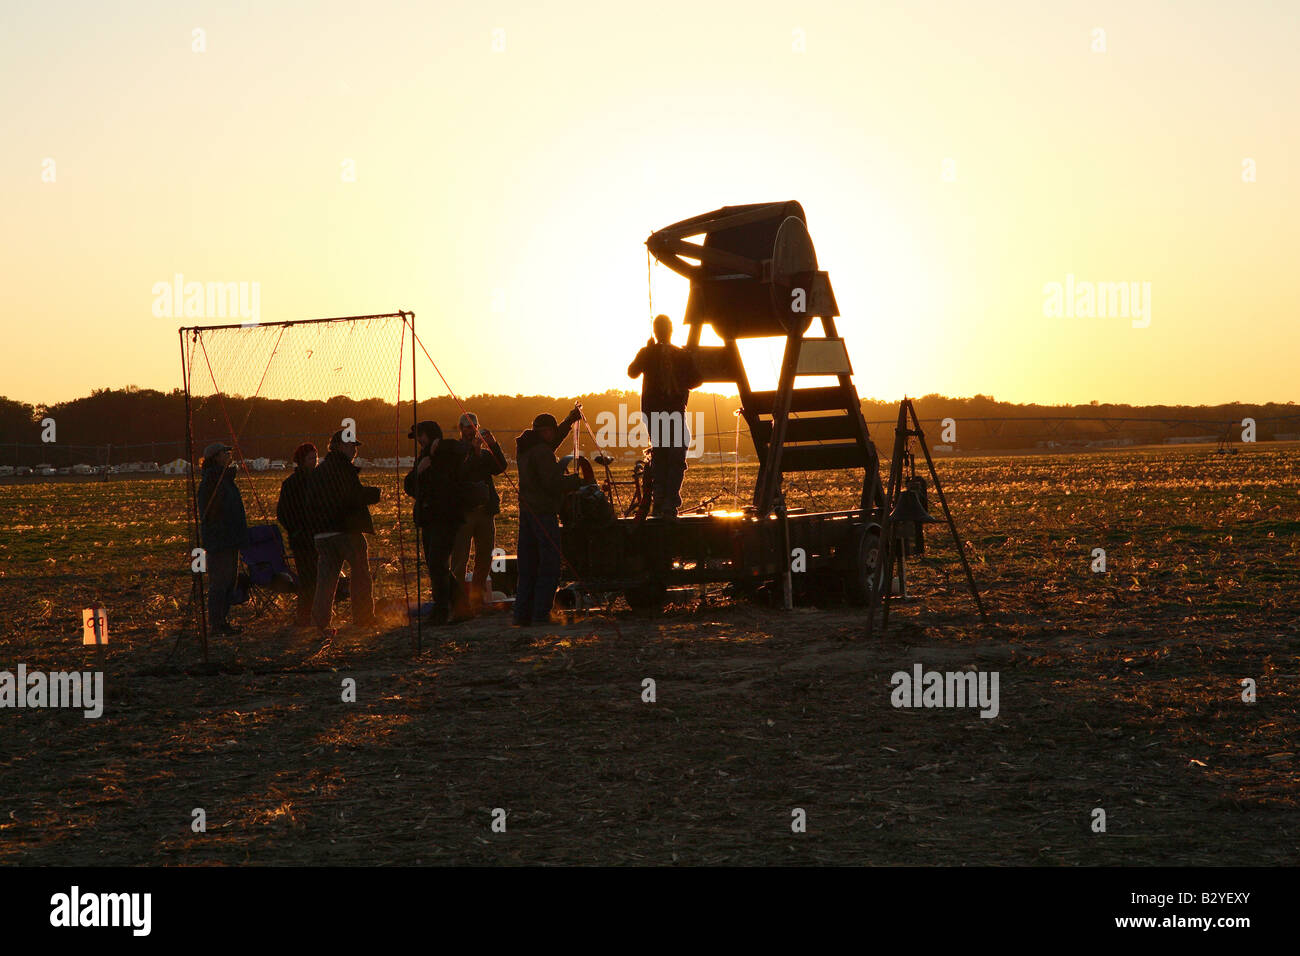 Wooden barrel human powered pumpkin flinging machine with people pulling down the flinging arm silloutted against setting sun Stock Photo